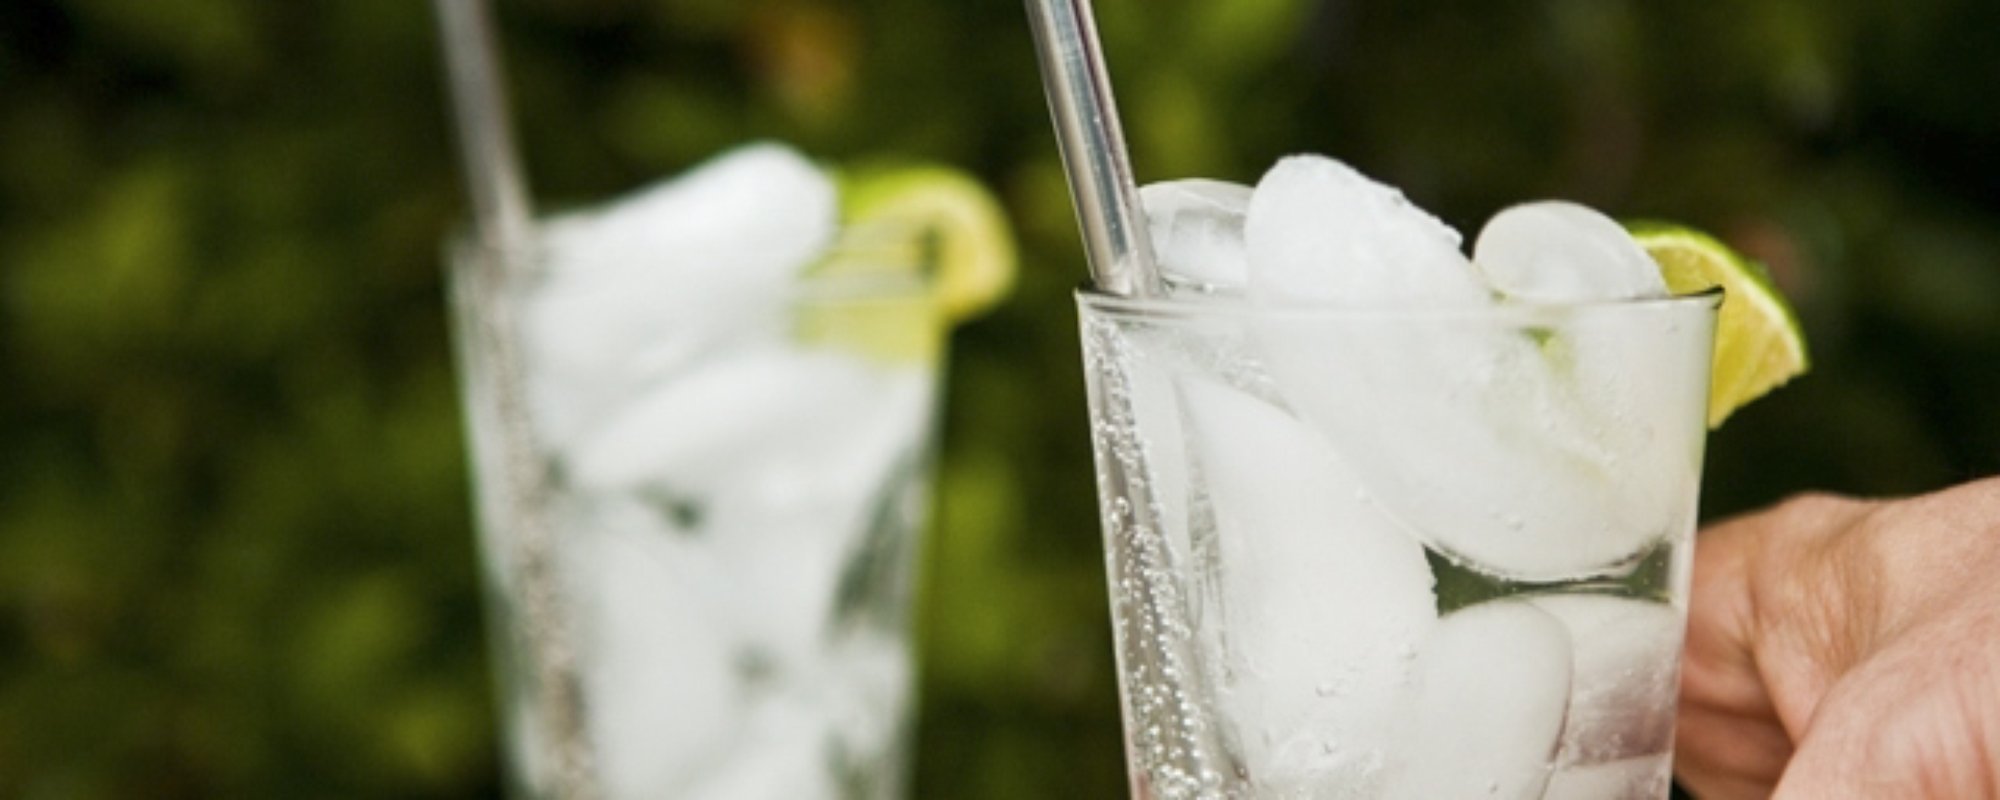 Stainless Steel Straws - The Top 3 Reasons to Own One